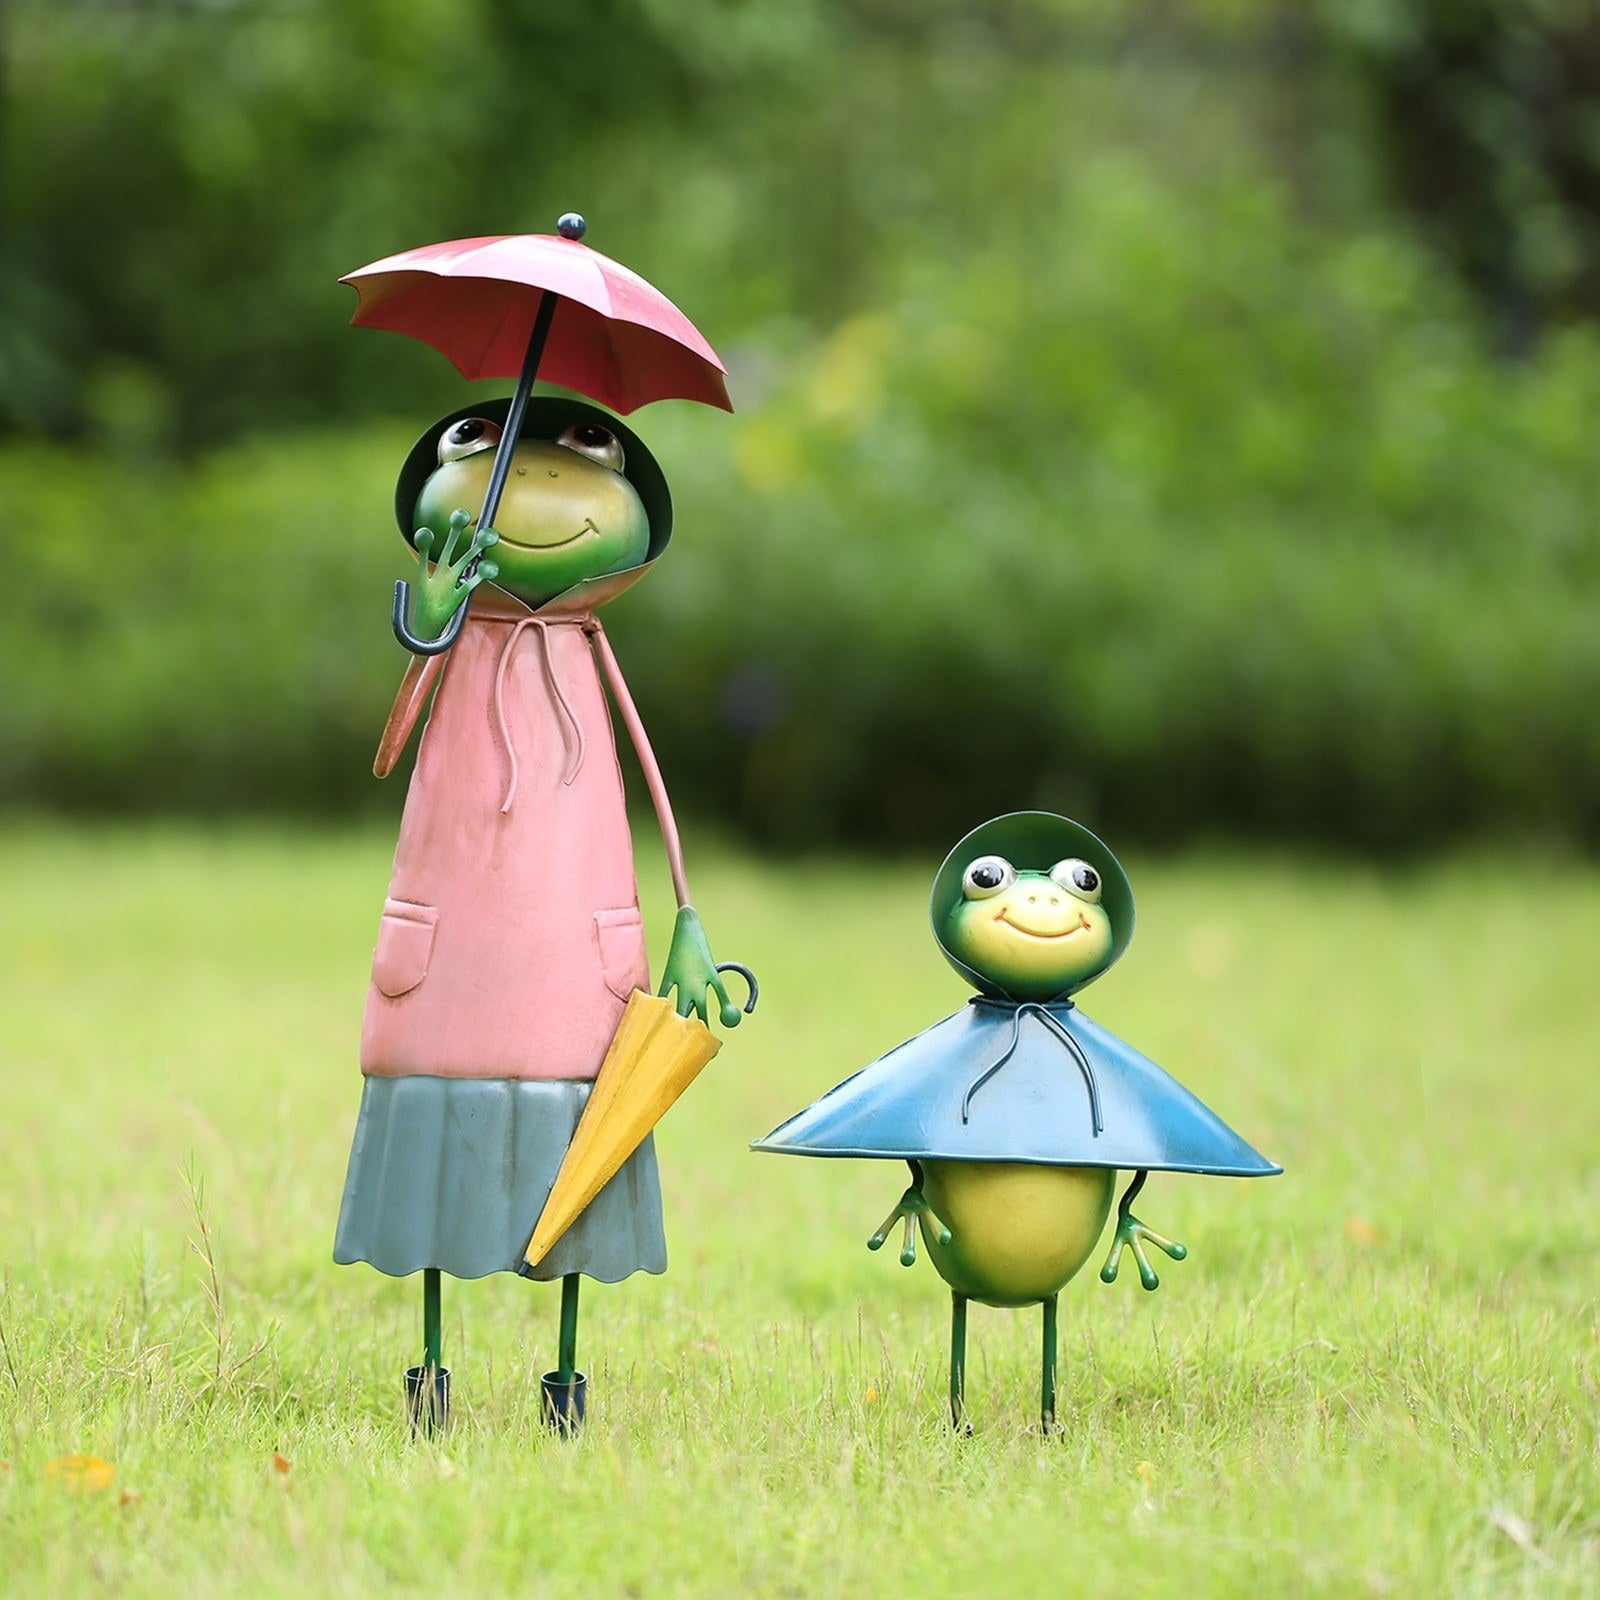 In the land of fairytales, a cute frog ornament hops into your life!